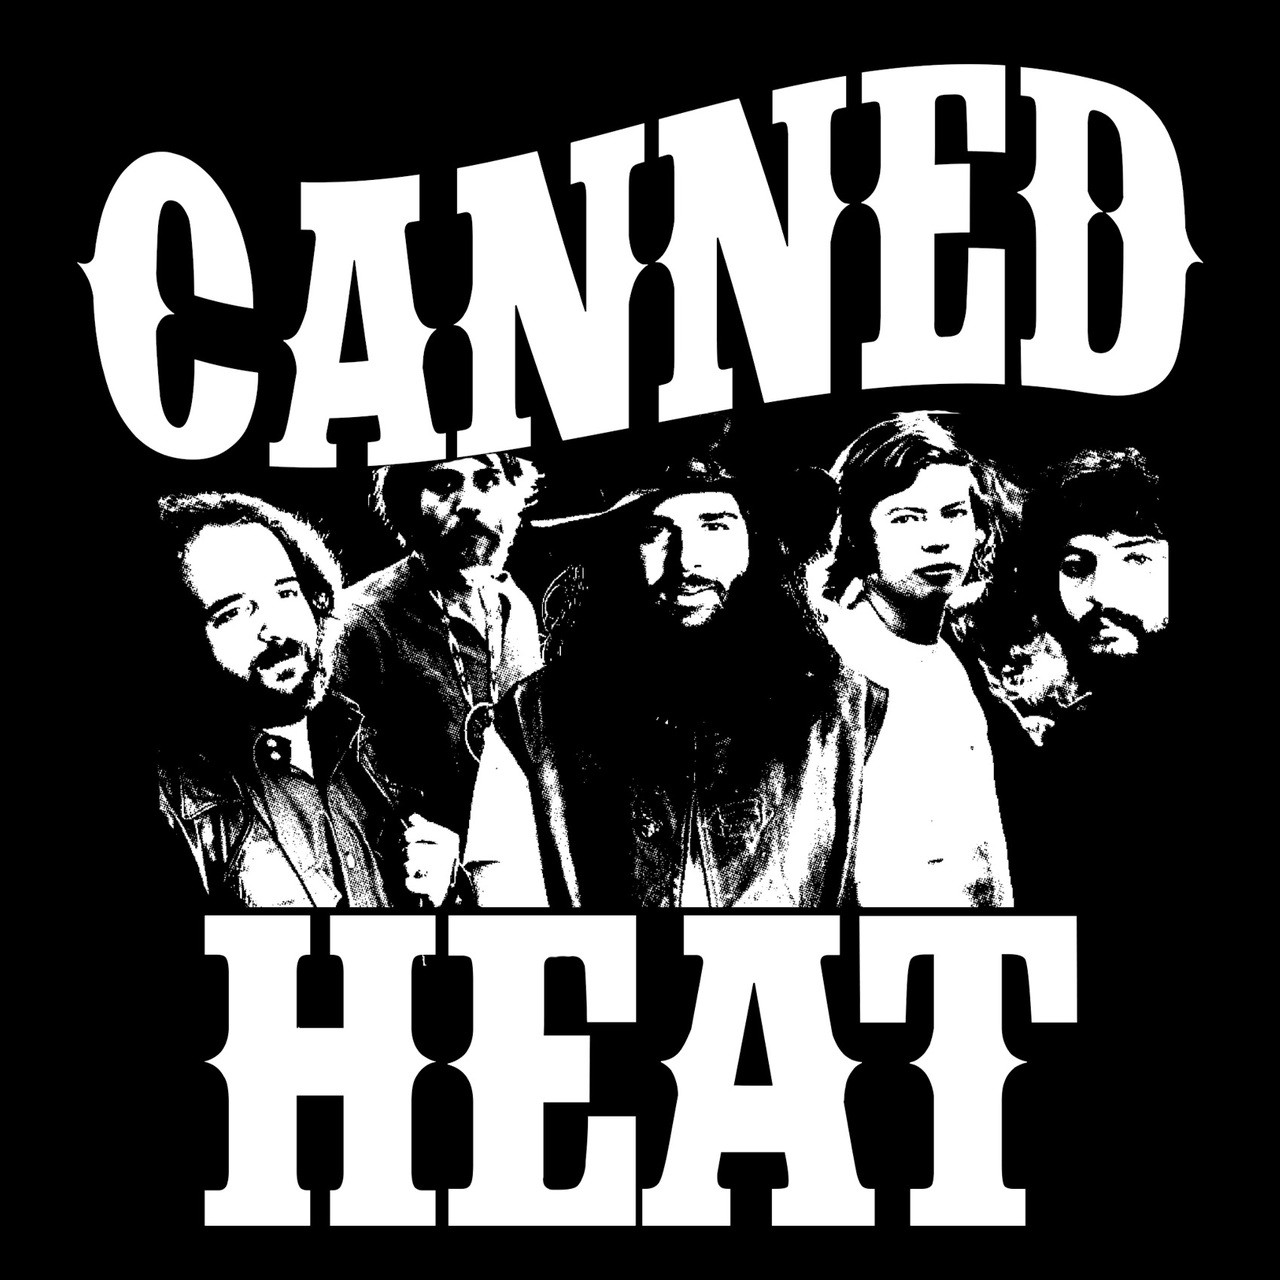 Canned heat steam фото 30